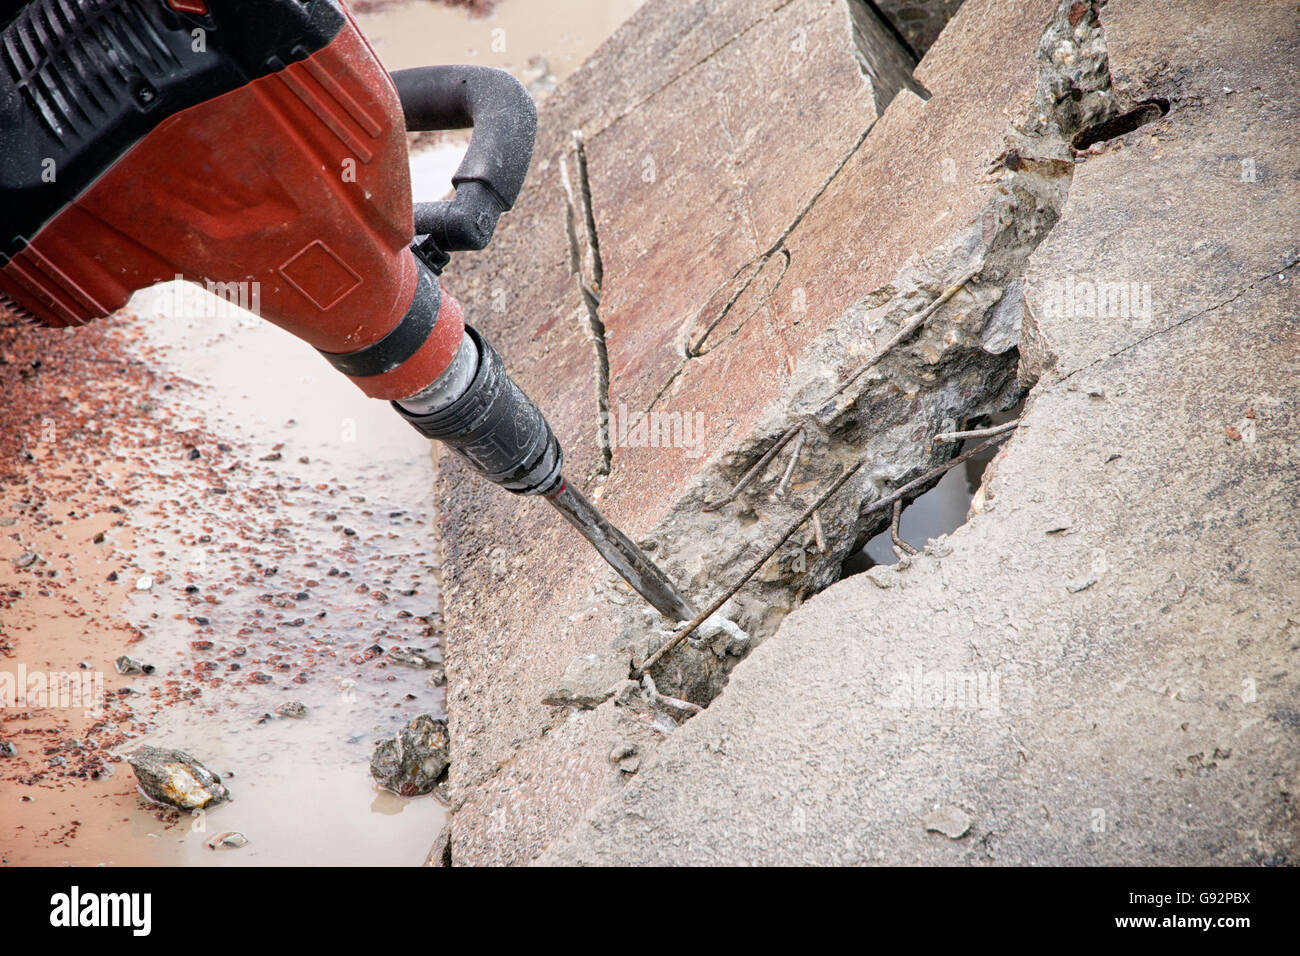 Construction tool, the jackhammer with demolition debris Stock Photo